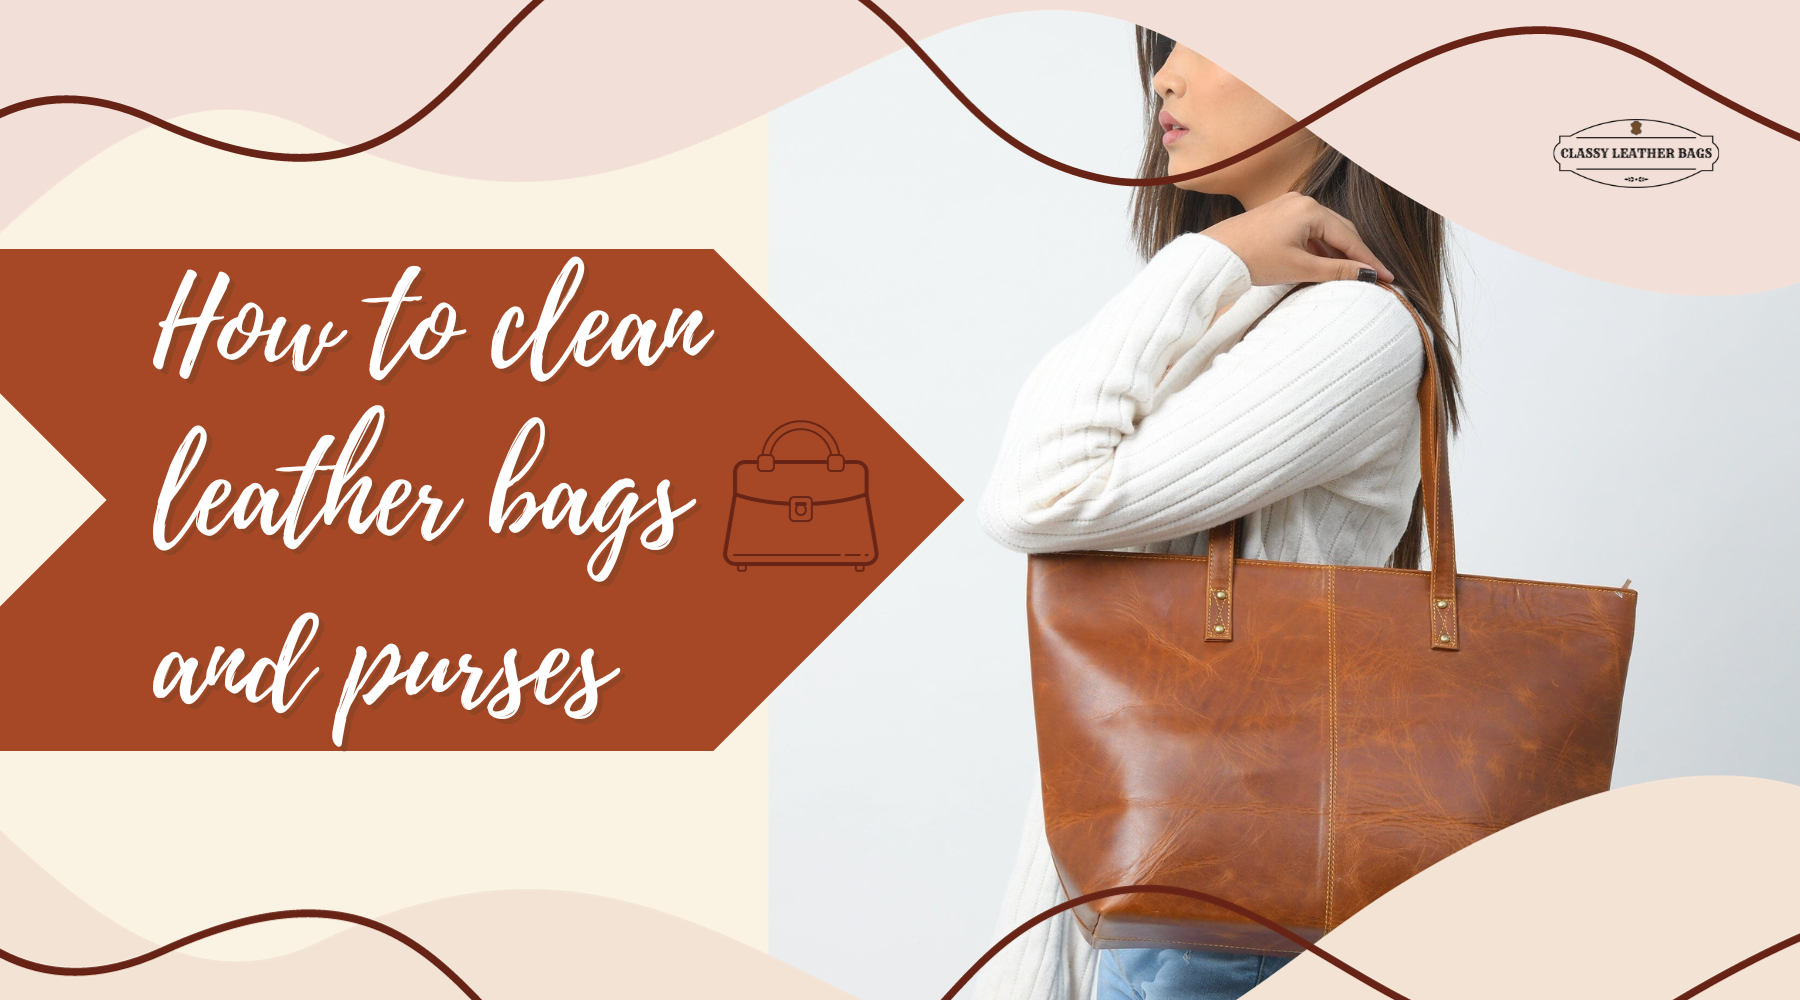 How to clean leather bags and purses: A comprehensive guide